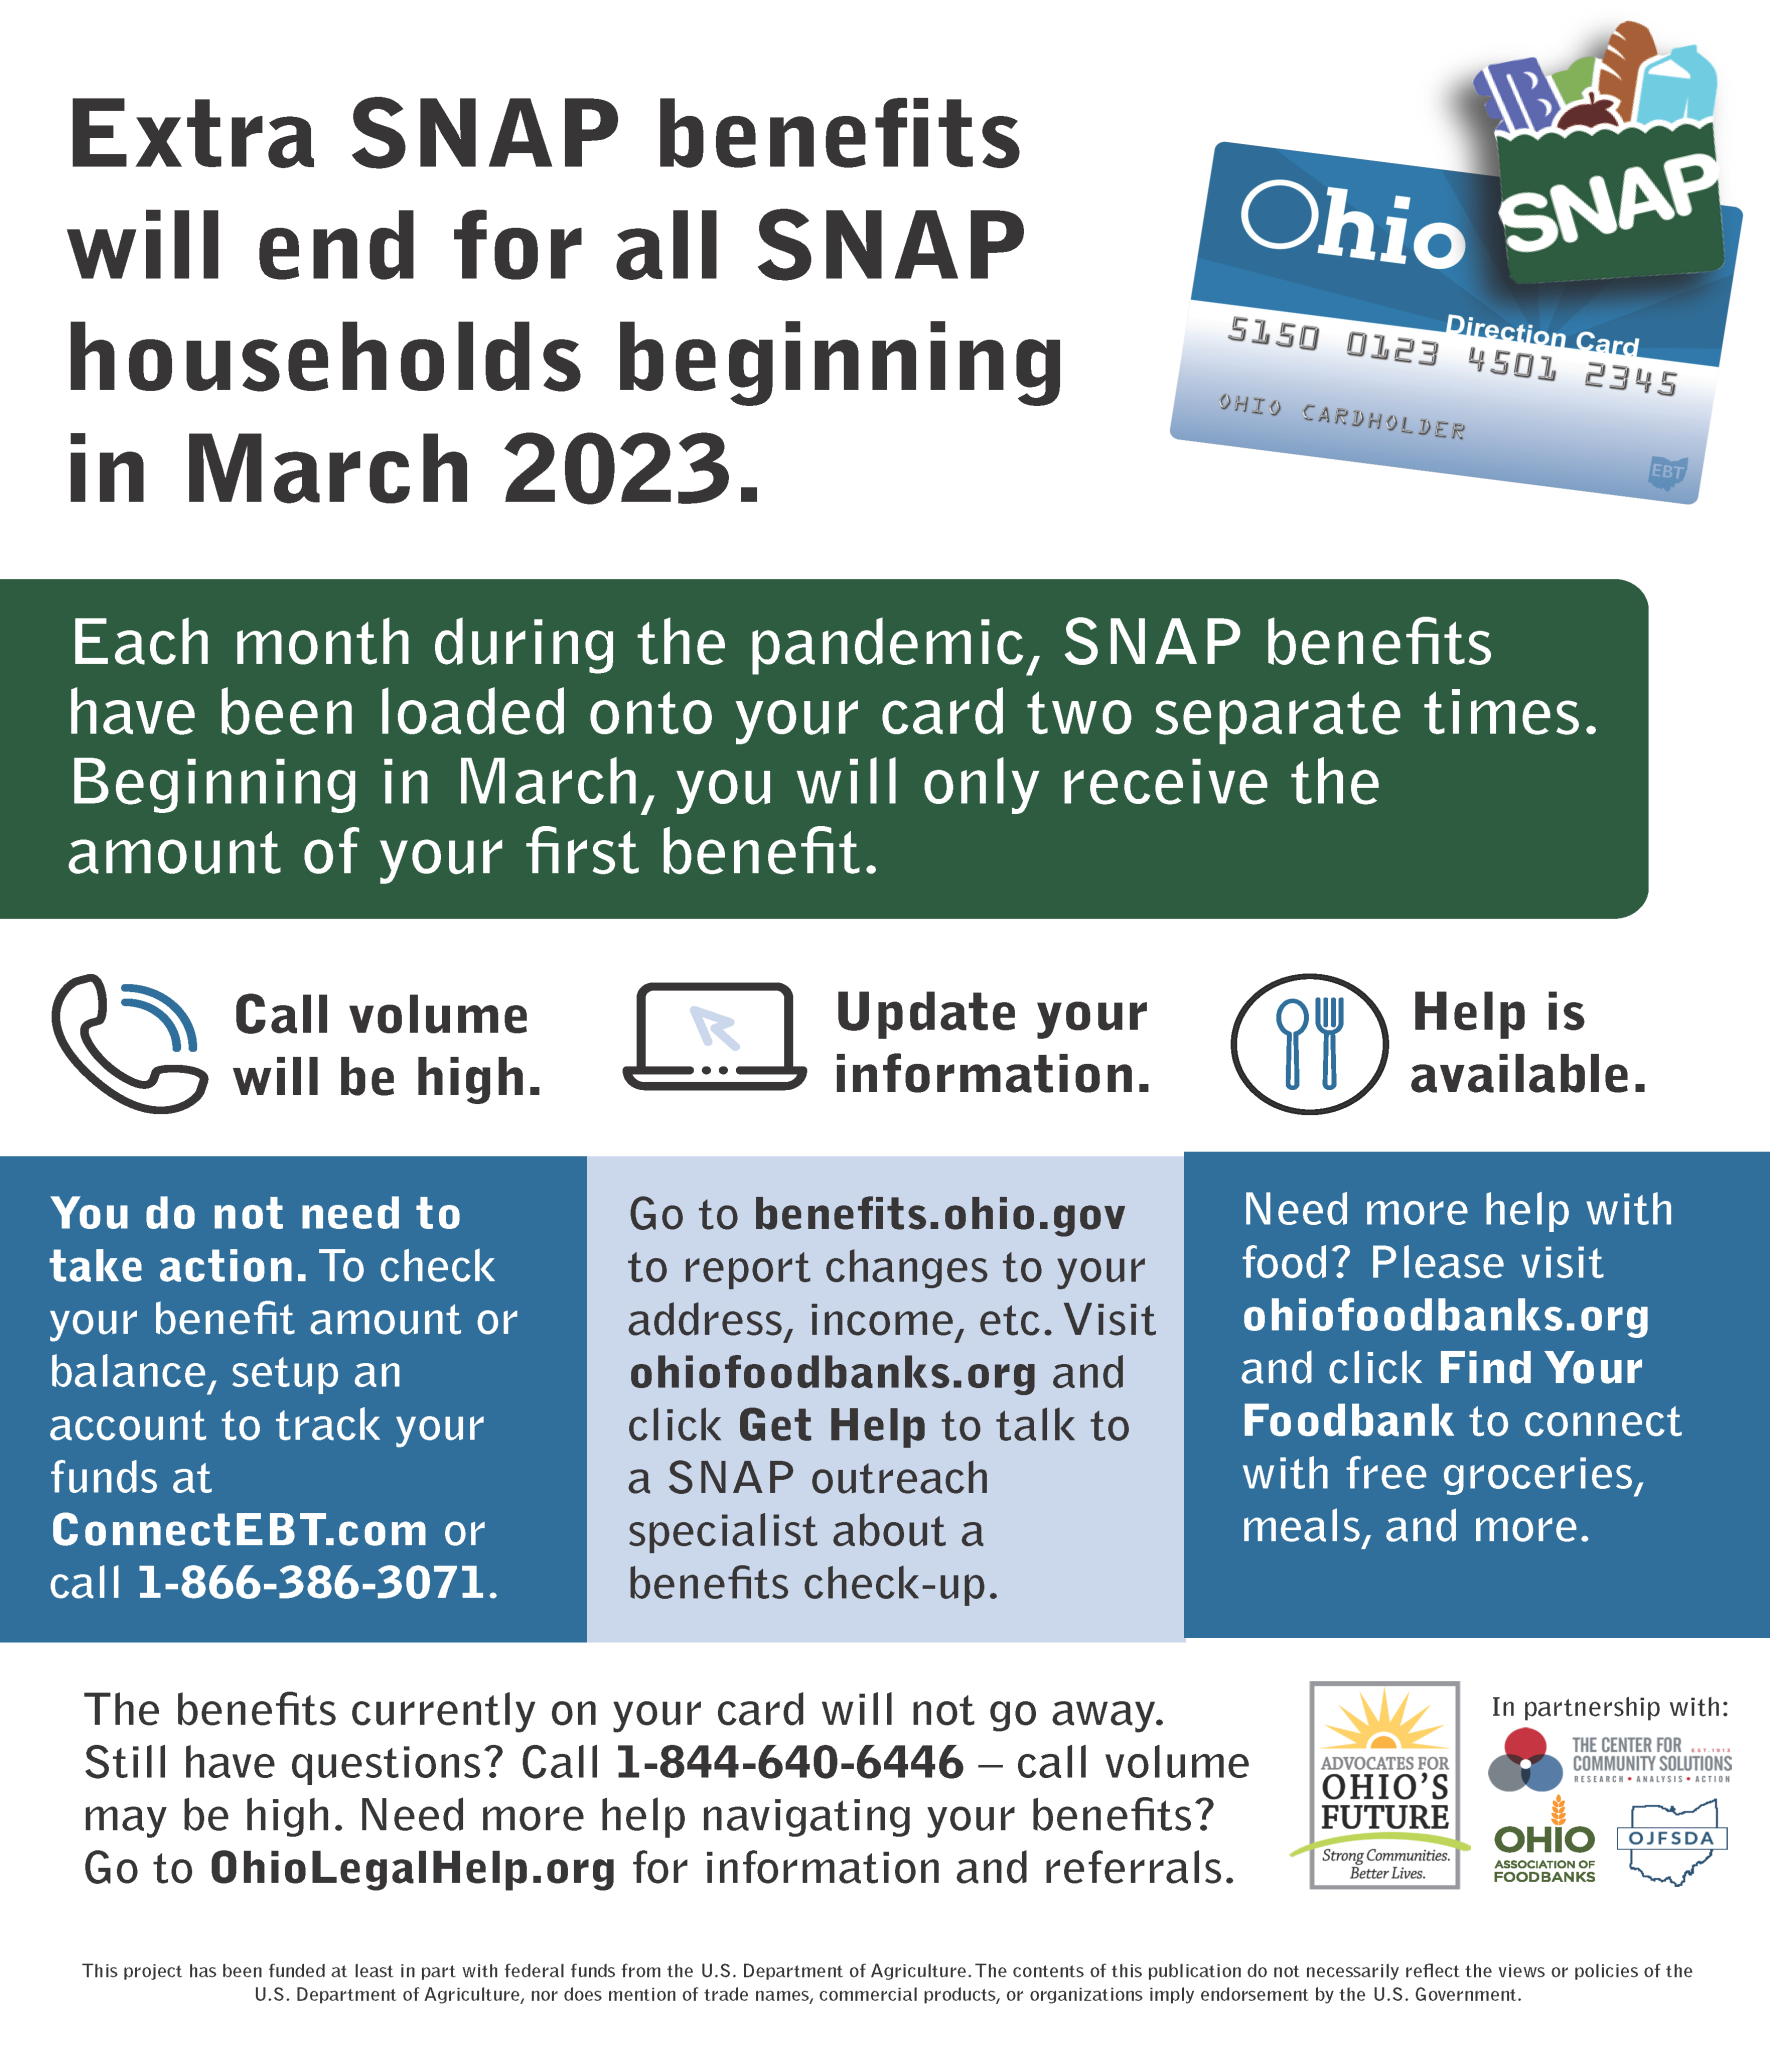 SNAP 2023 - Changes Starting in March